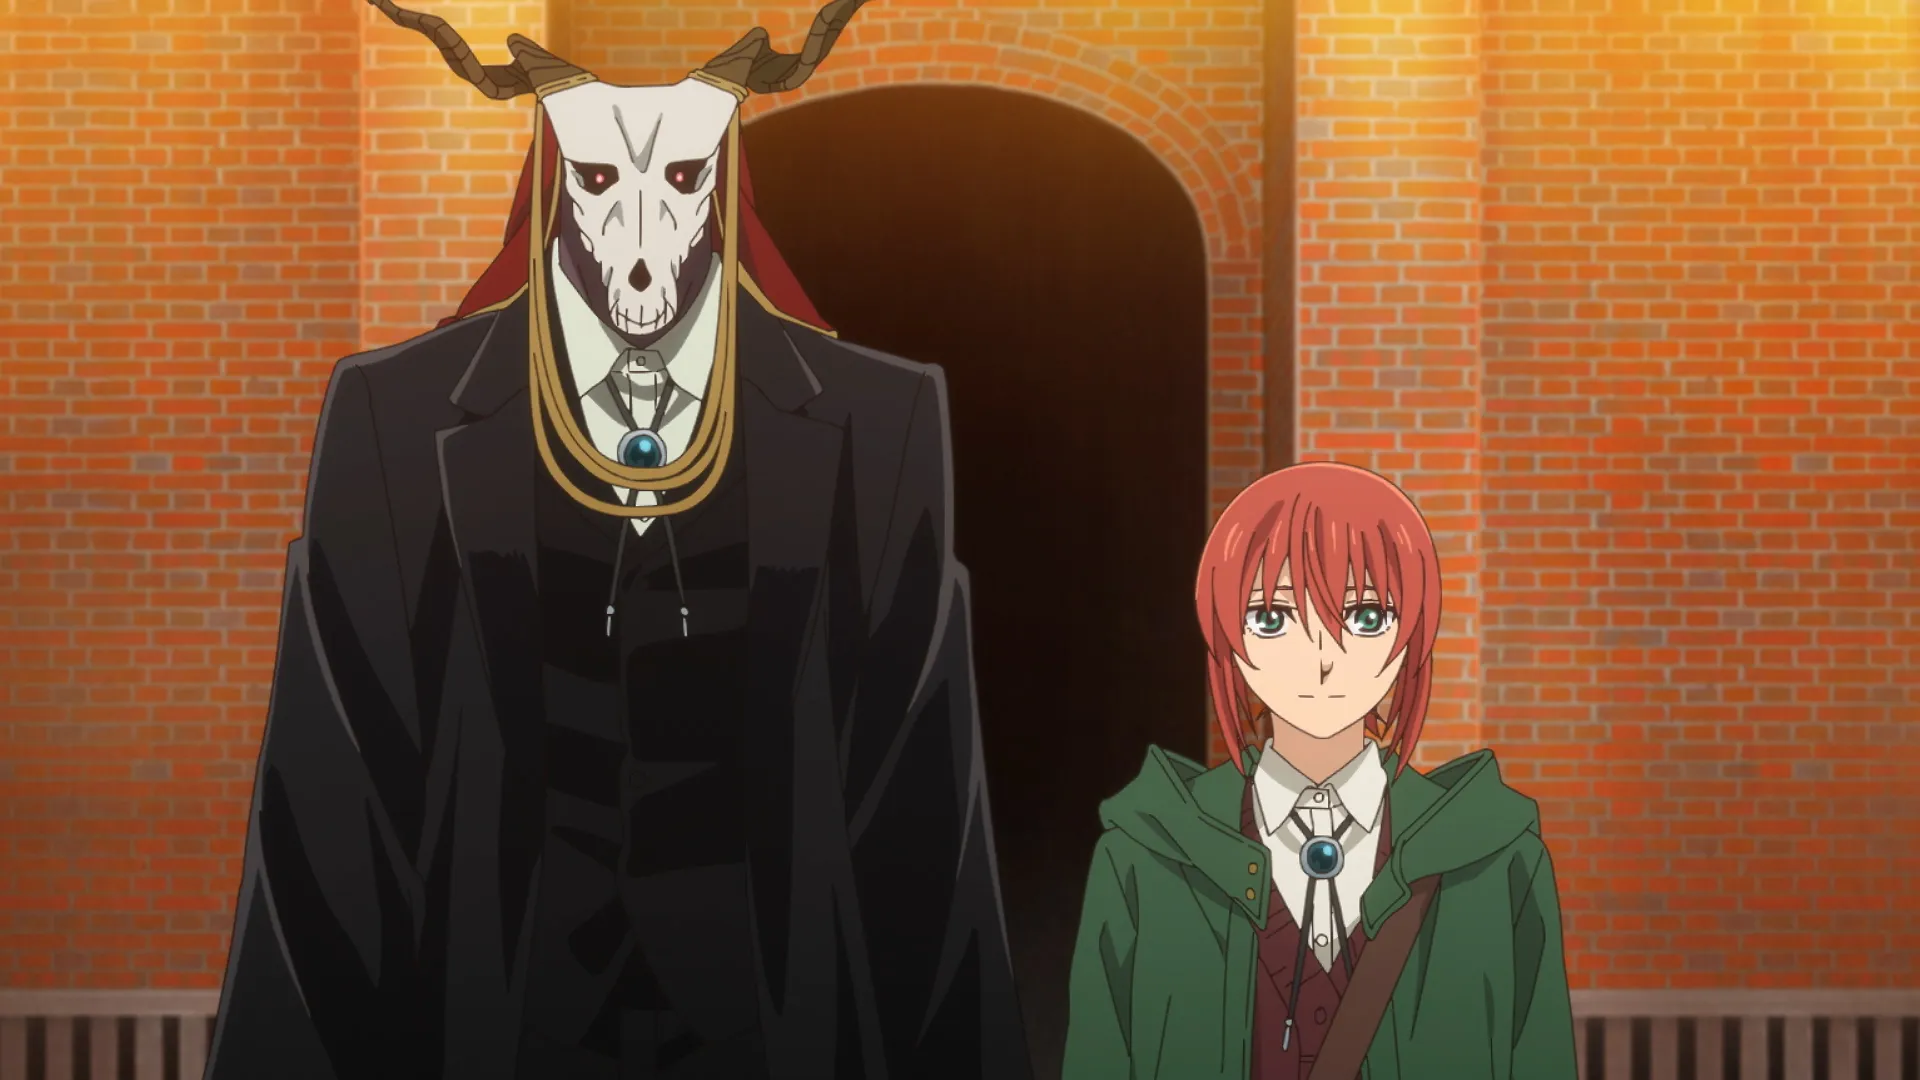 The Ancient Magus Bride Season 2 Episode 13 English Dub Release Date, Spoilers, Voice Cast & Other Speculations Explored